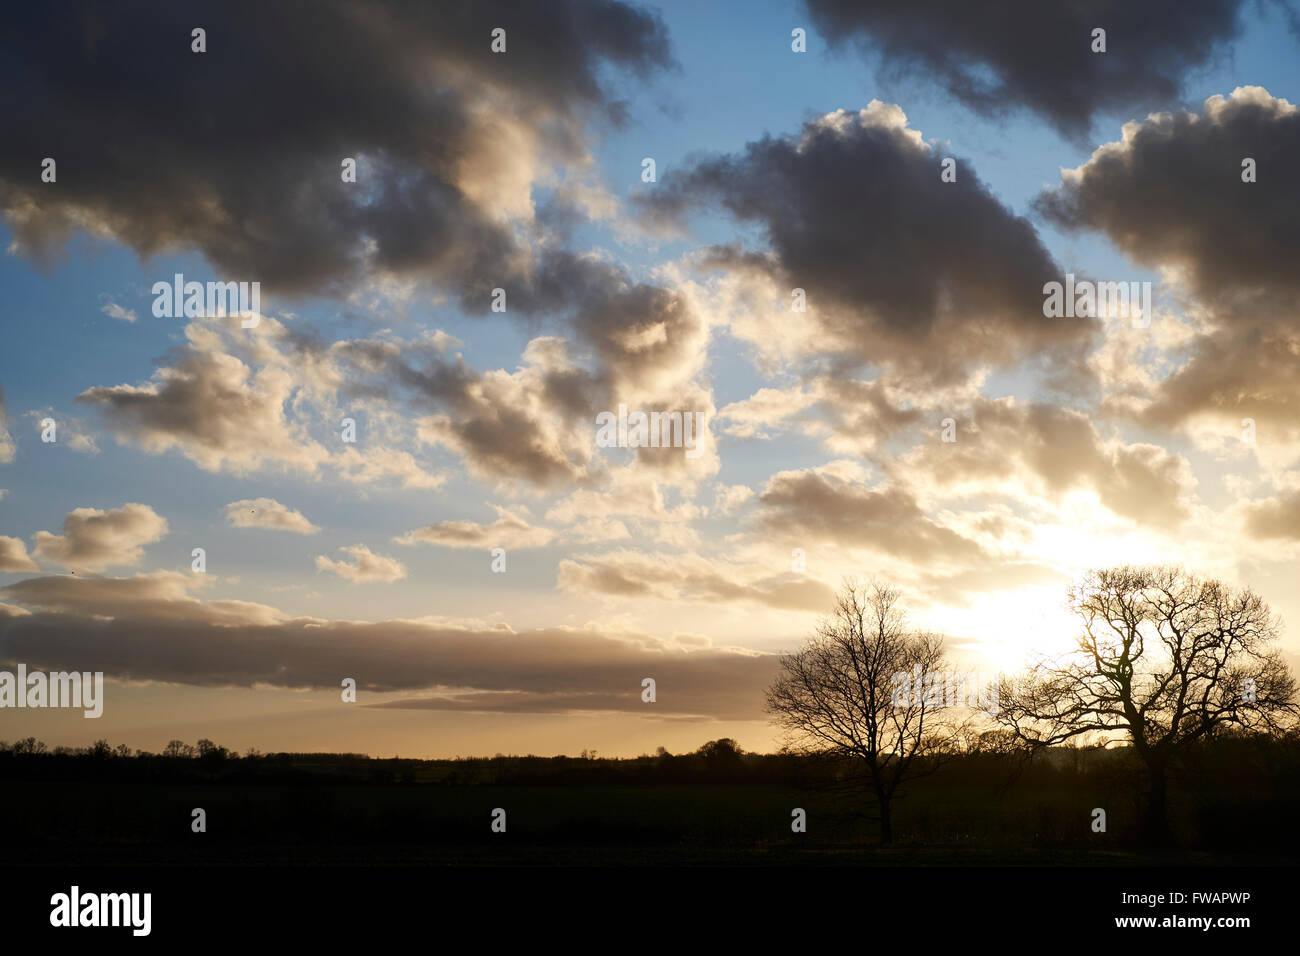 Trees silhouetted against sunset sky filled with fair-weather clouds. Bedfordshire, UK. Stock Photo